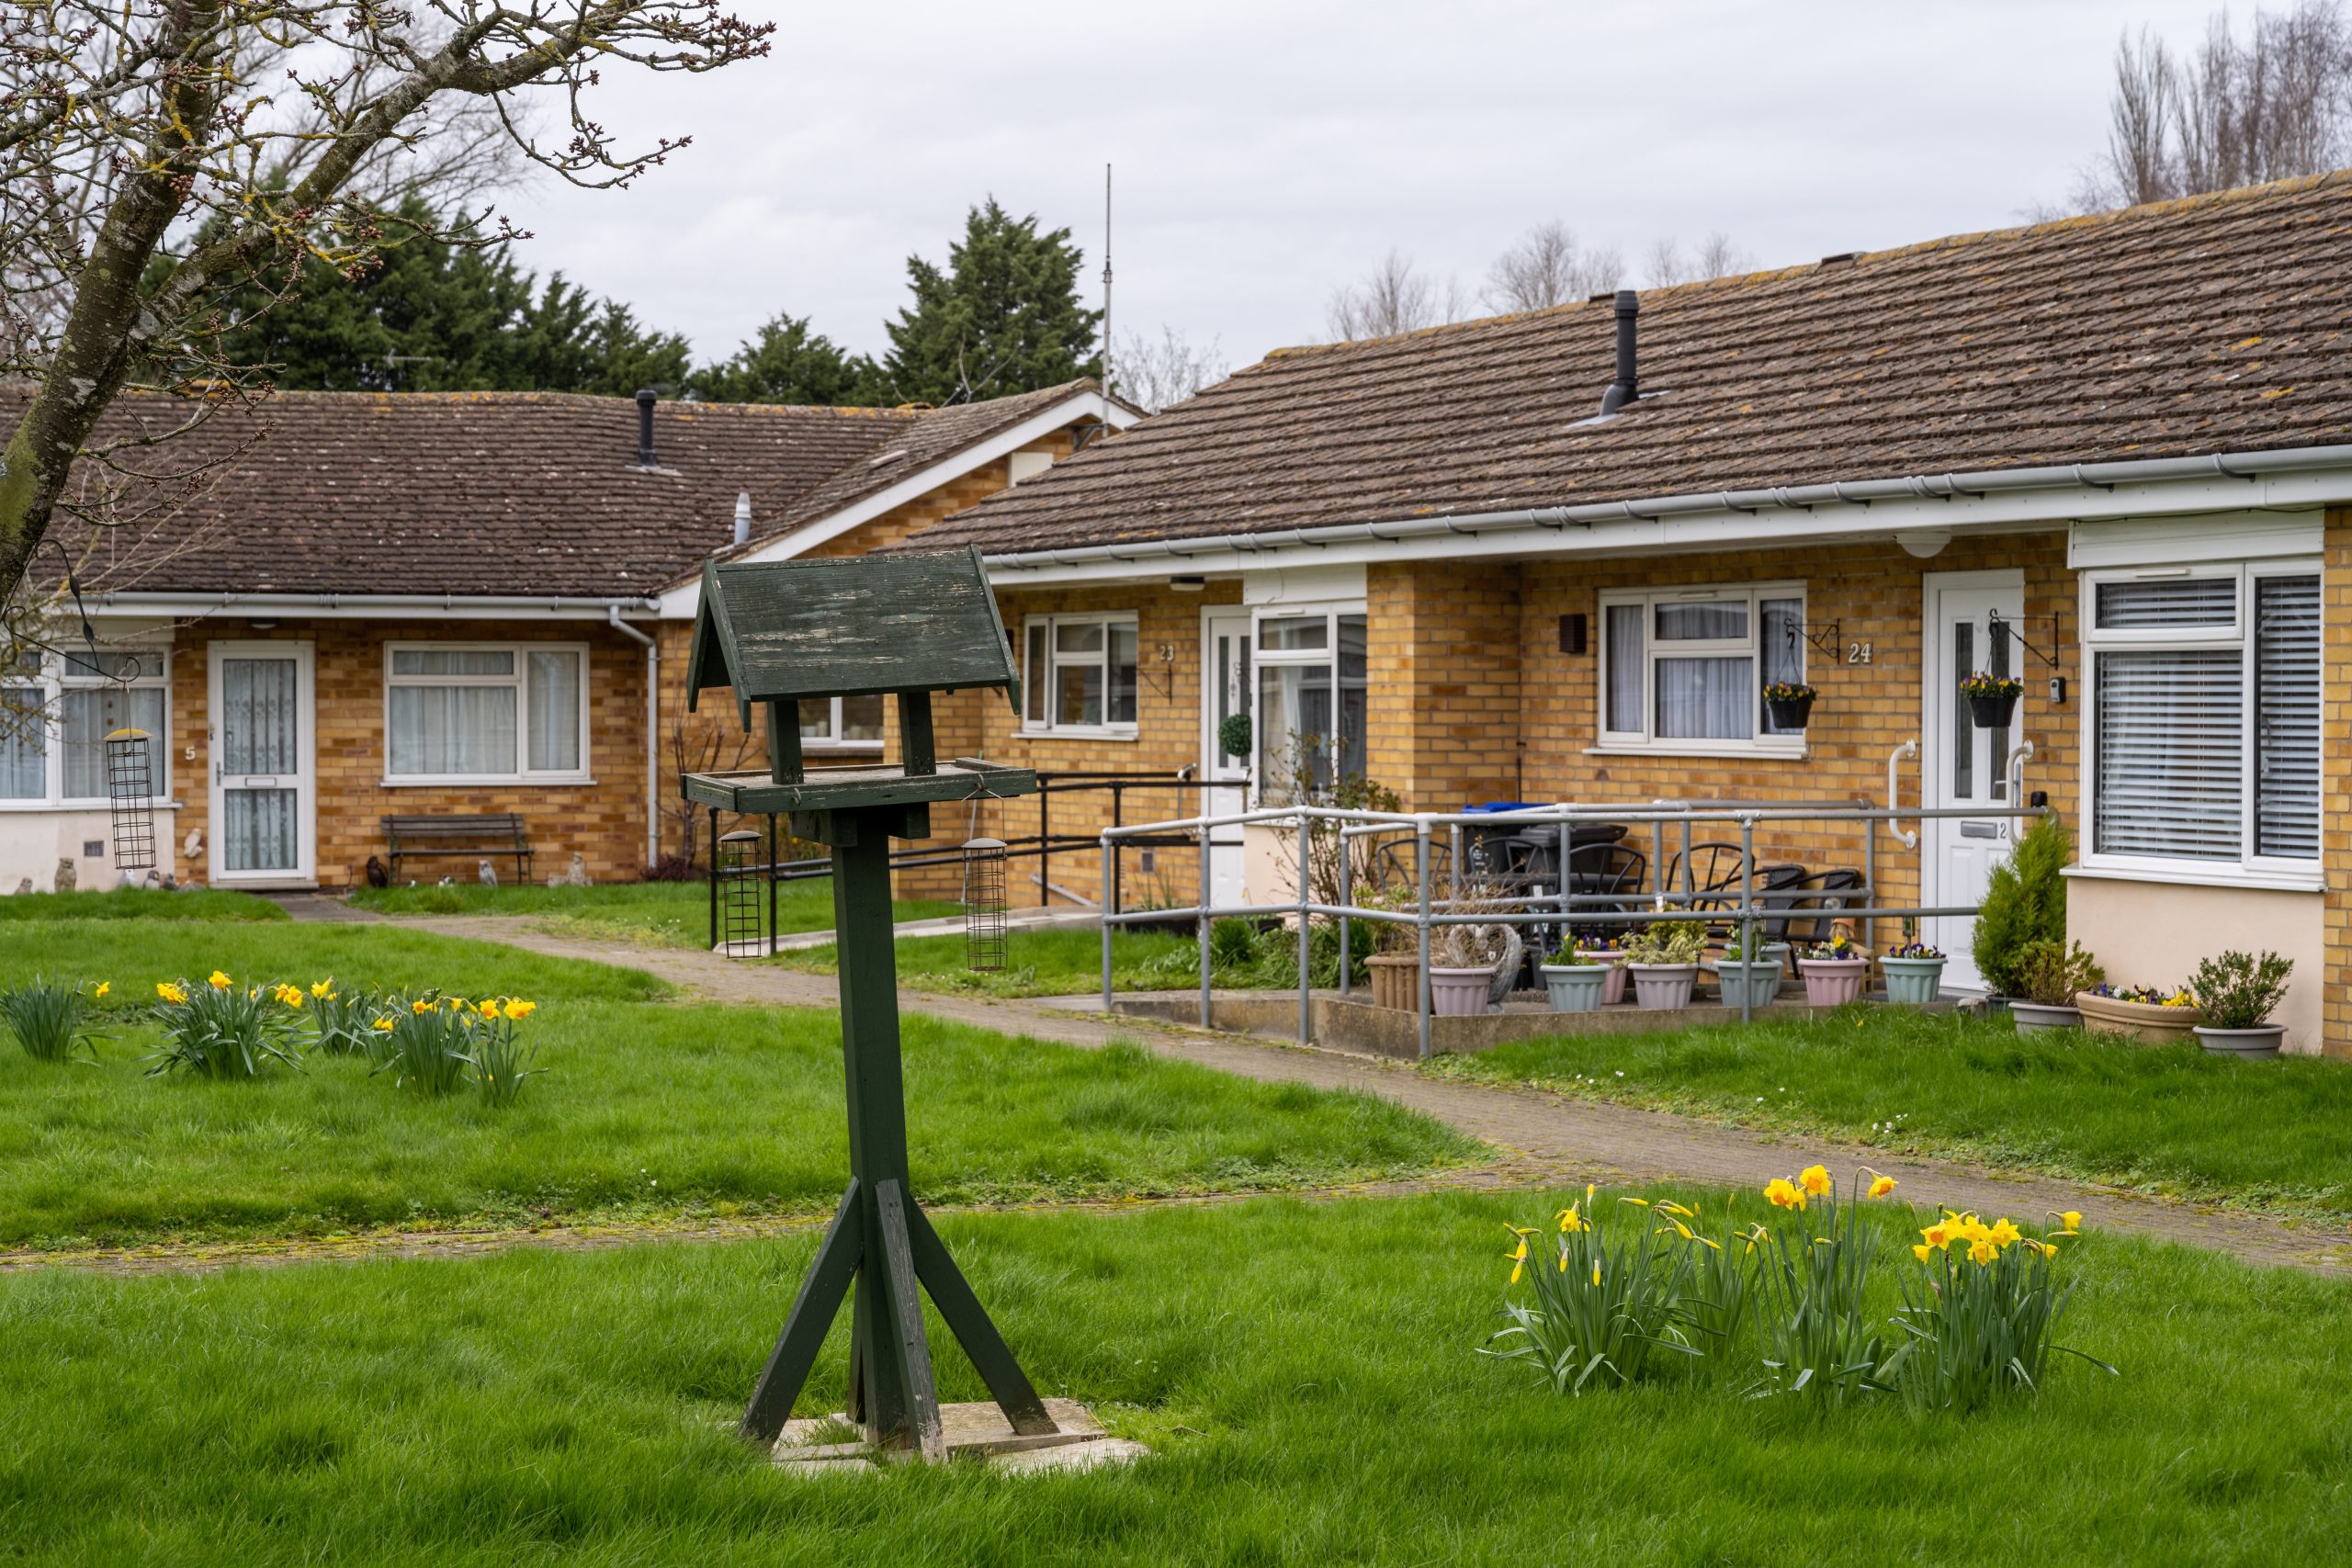 Garden area by bungalows at Meadow Court, Towcester